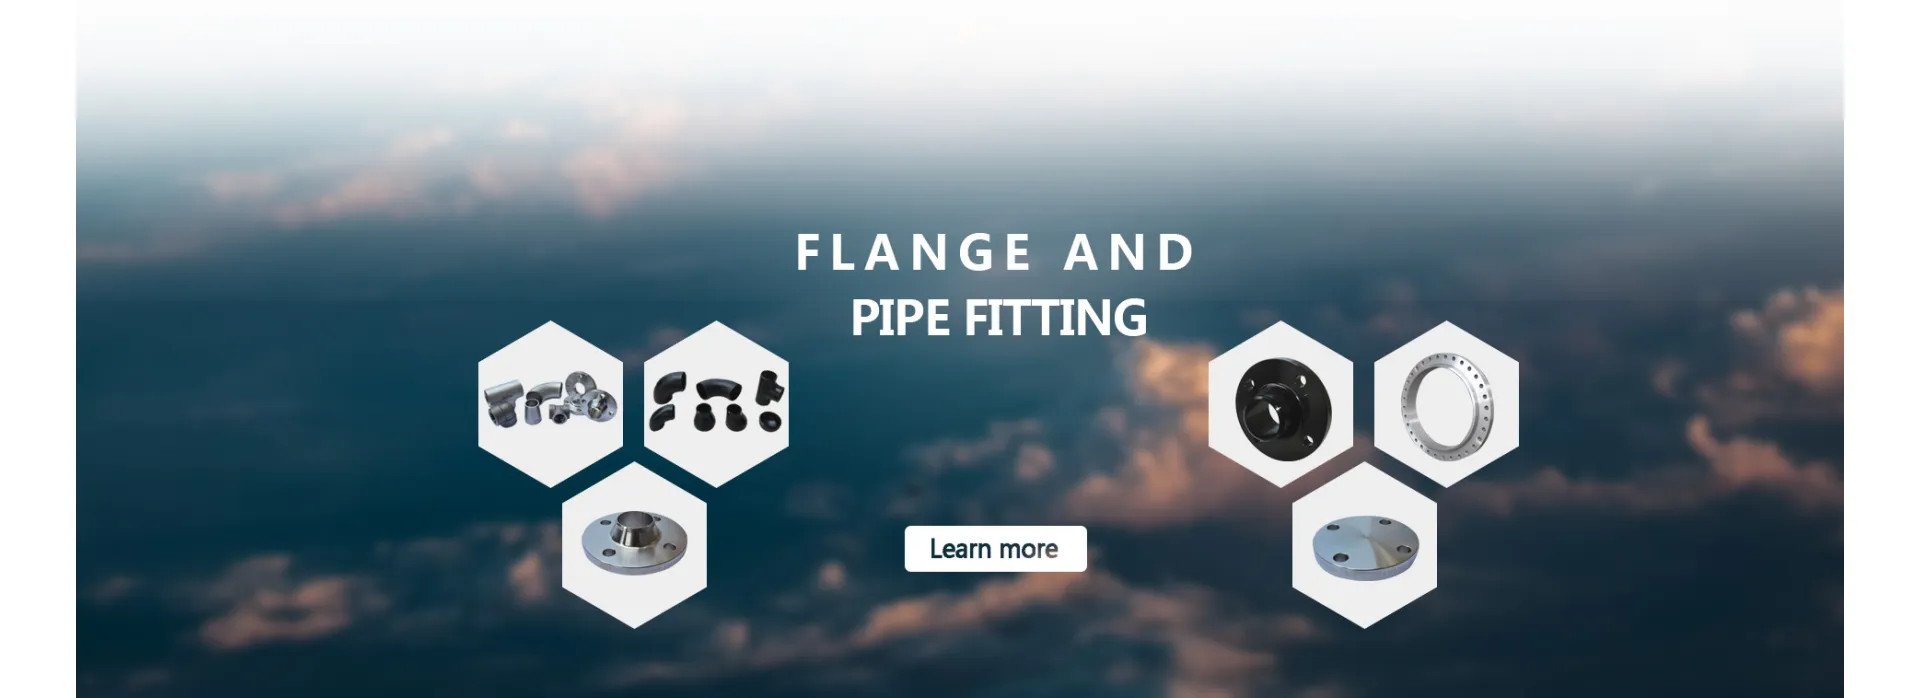 Flange and Pipe Fitting